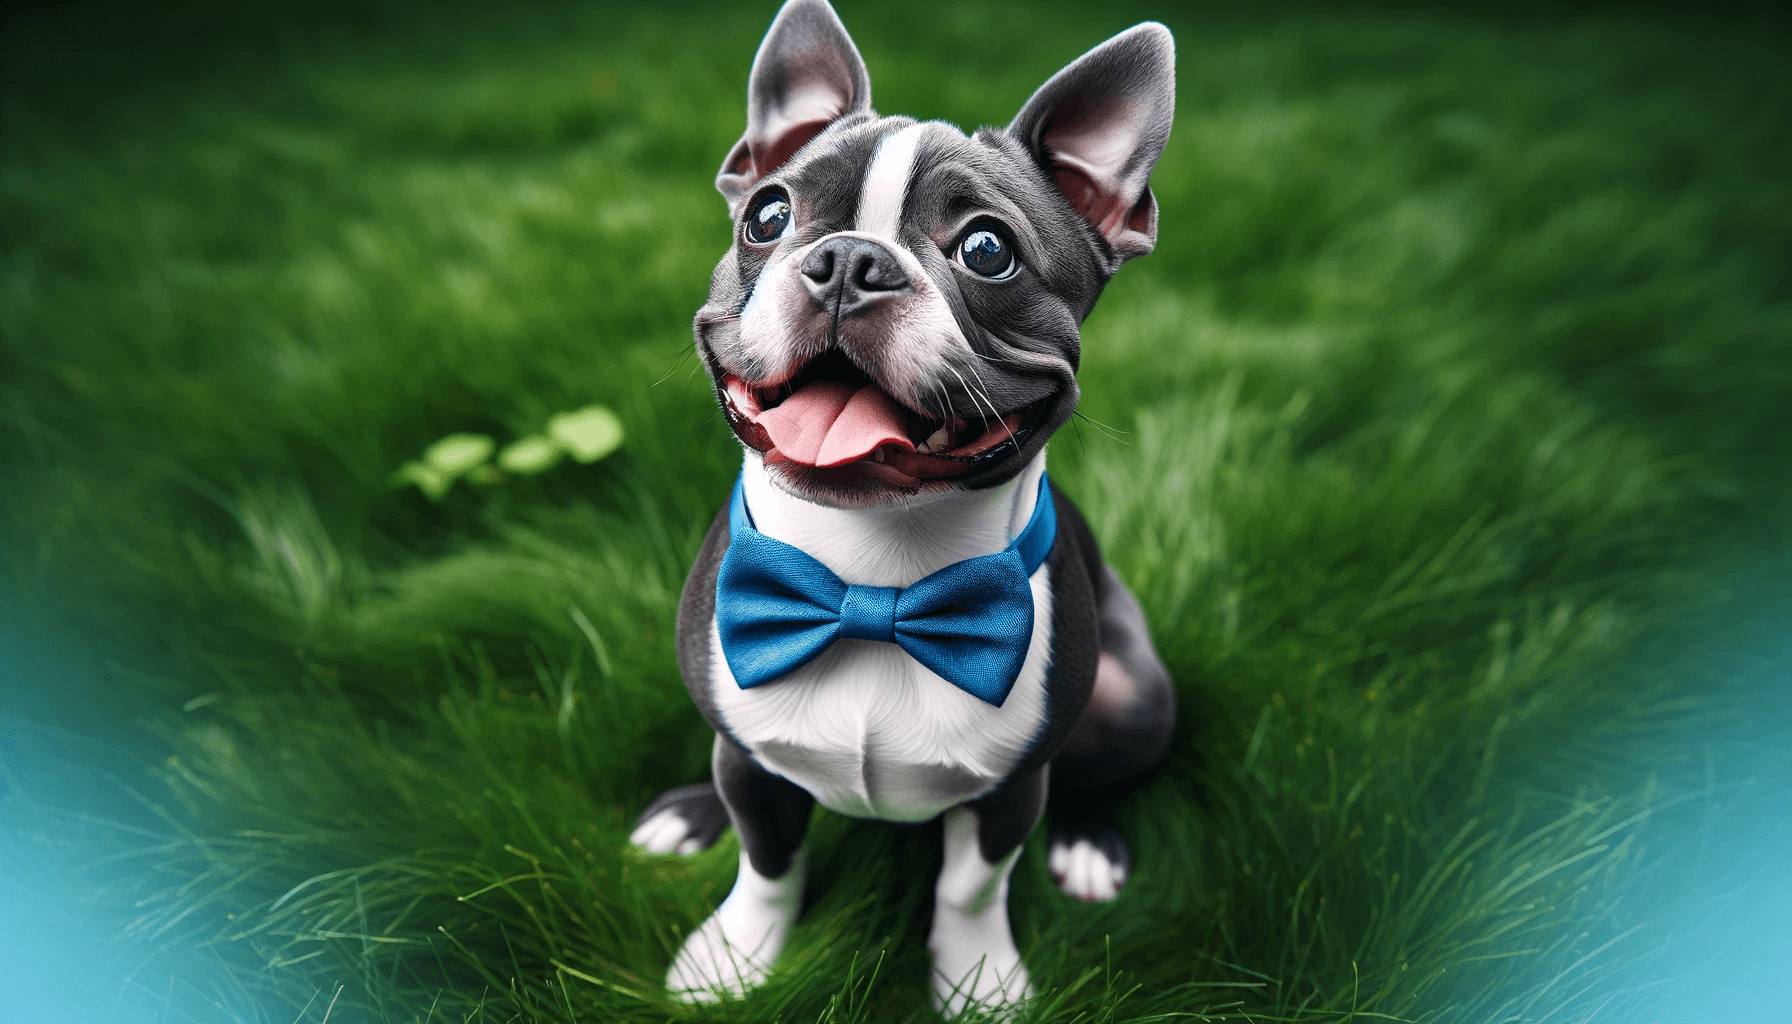 A Blue Boston Terrier with striking white and black markings, wearing a blue bow tie, sitting on grass and looking up with a playful expression.